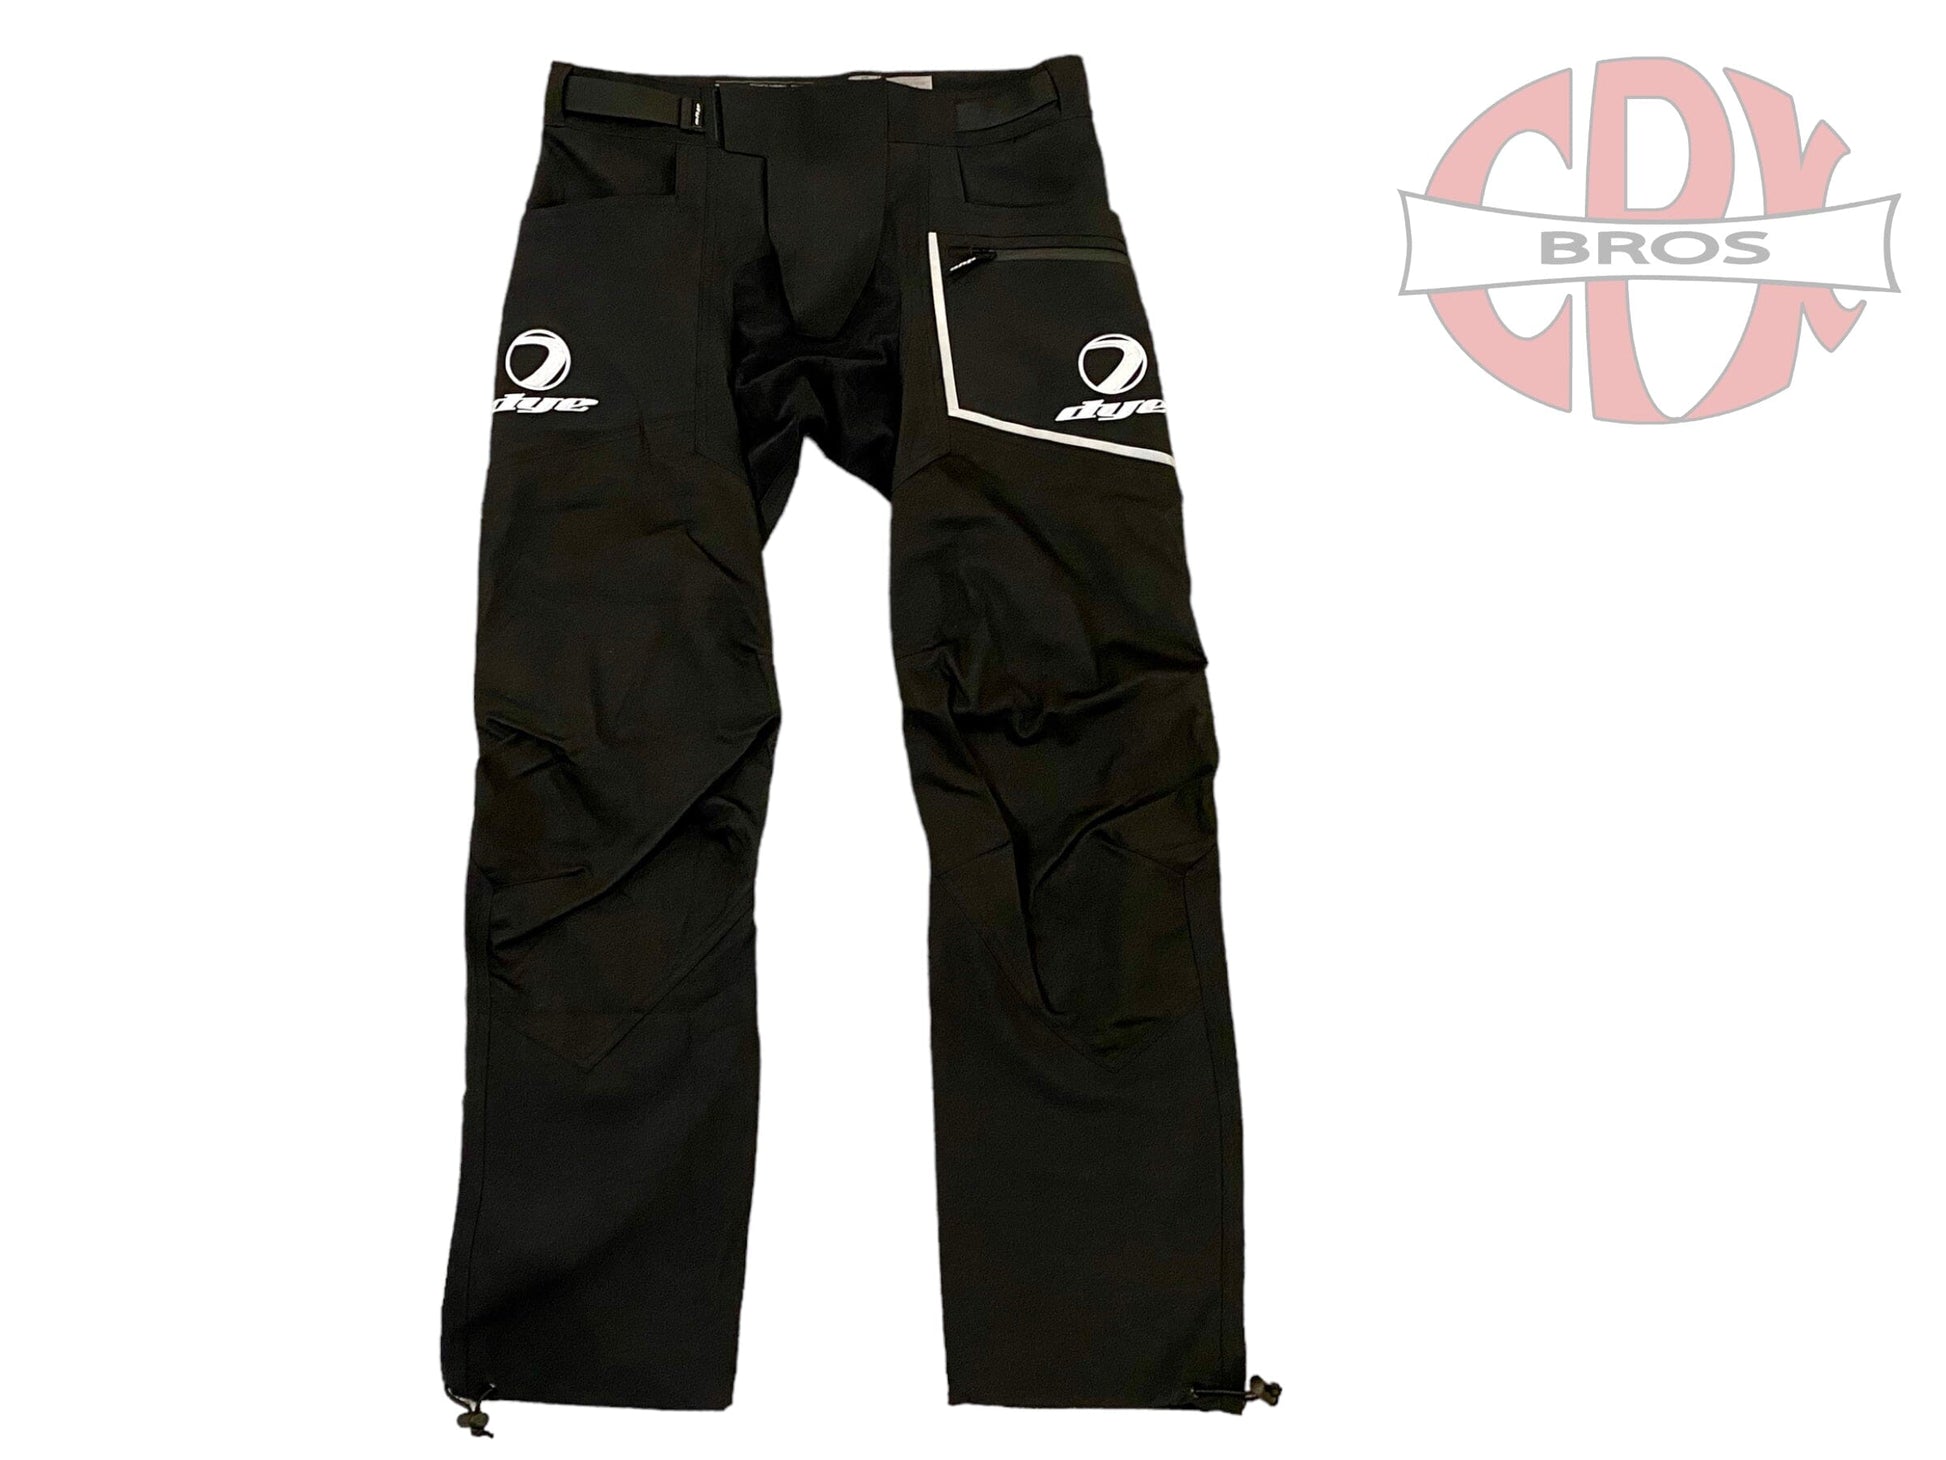 Used DYE UL-C PANTS CRBN Dye Paintball Pants Size Medium Paintball Gun from CPXBrosPaintball Buy/Sell/Trade Paintball Markers, Paintball Hoppers, Paintball Masks, and Hormesis Headbands